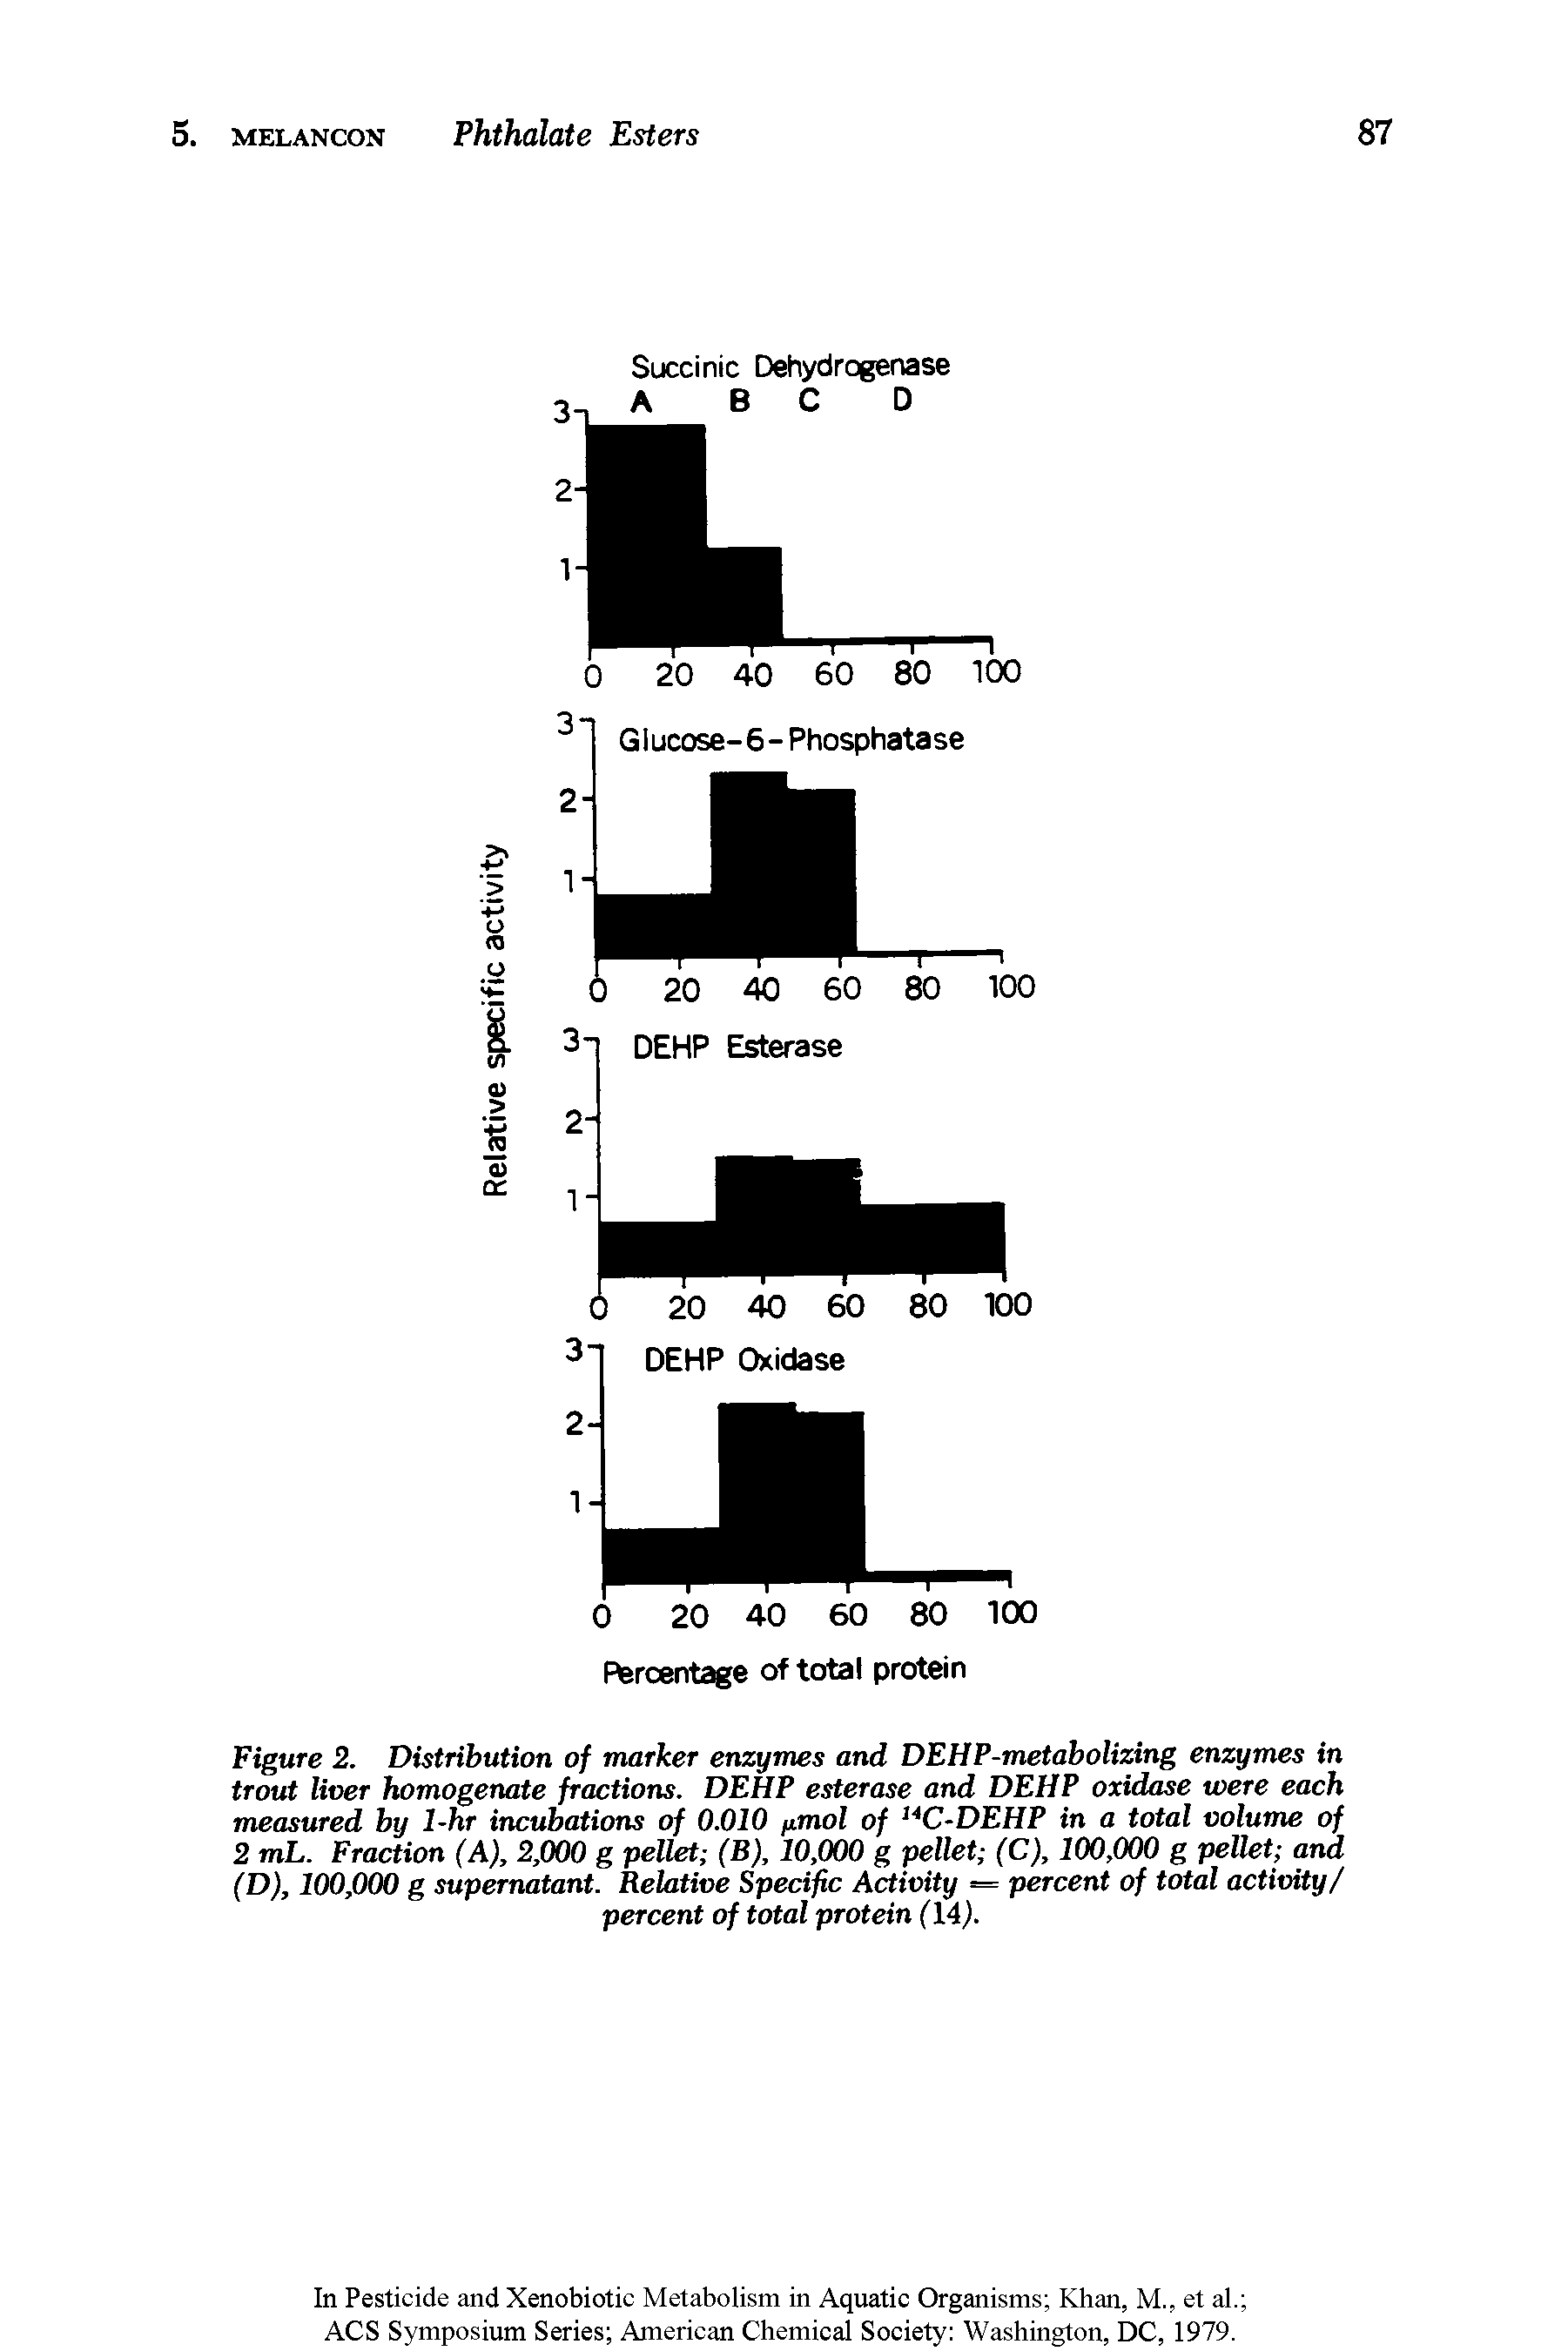 Figure 2. Distribution of marker enzymes and DEHP-metabolizing enzymes in trout liver homogenate fractions. DEHP esterase and DEHP oxidase were each measured by 1-hr incubations of 0.010 ftmol of UC-DEHP in a total volume of 2 mL. Fraction (A), 2,000 g pellet (B), 10,000 g pellet (C), 100,000 g pellet and (D), 100,000 g supernatant. Relative Specific Activity = percent of total activity/ percent of total protein (14).